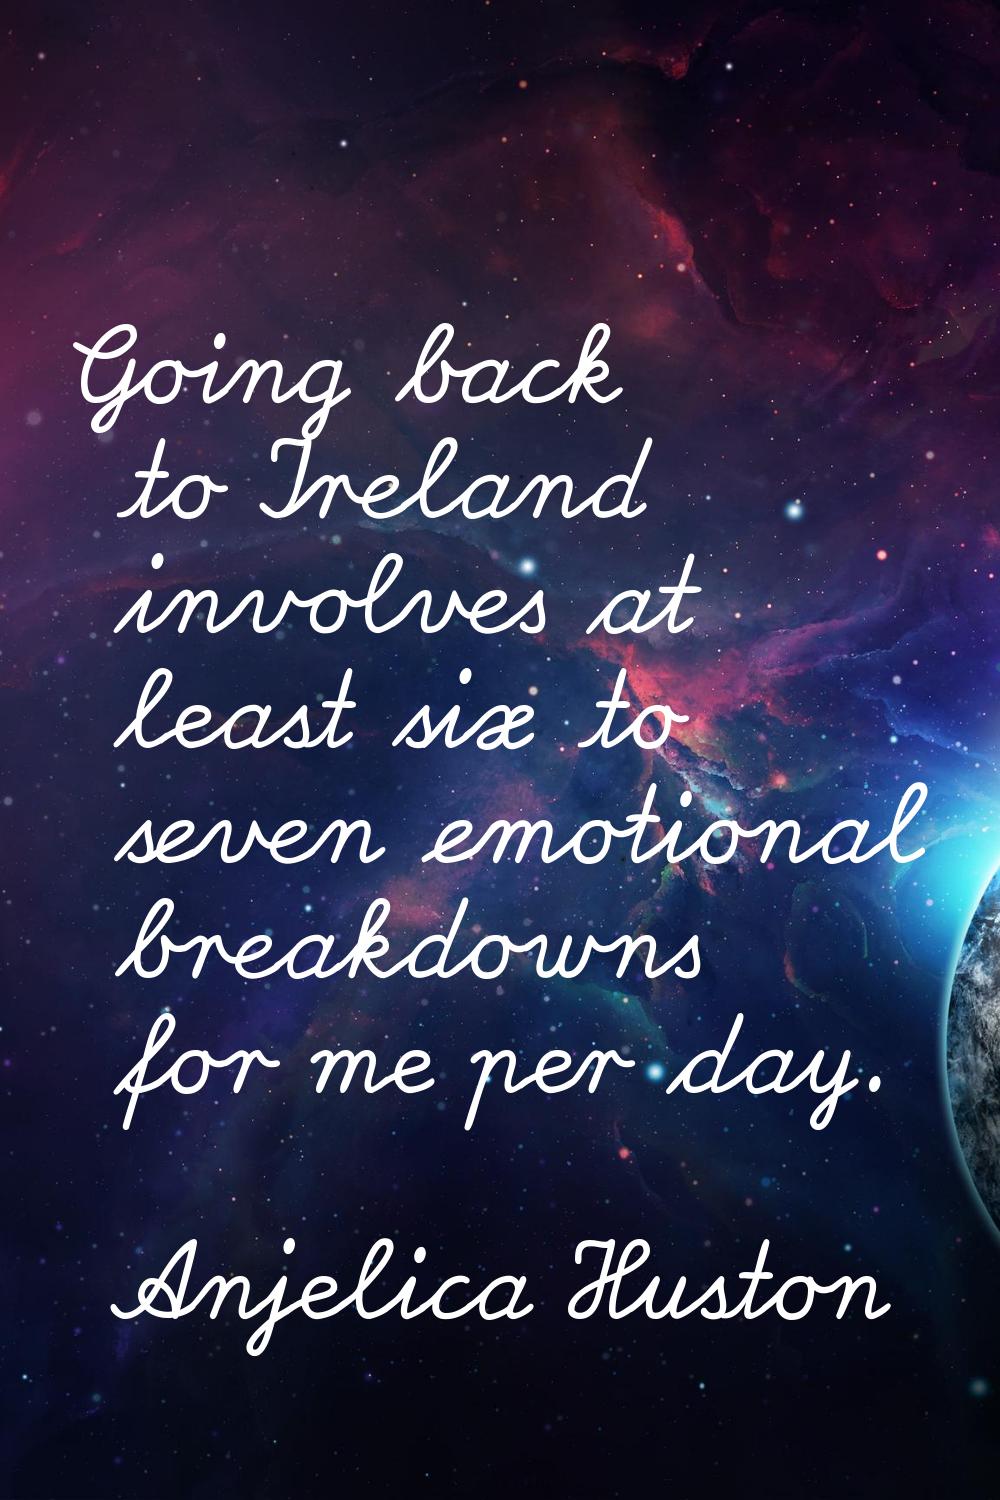 Going back to Ireland involves at least six to seven emotional breakdowns for me per day.